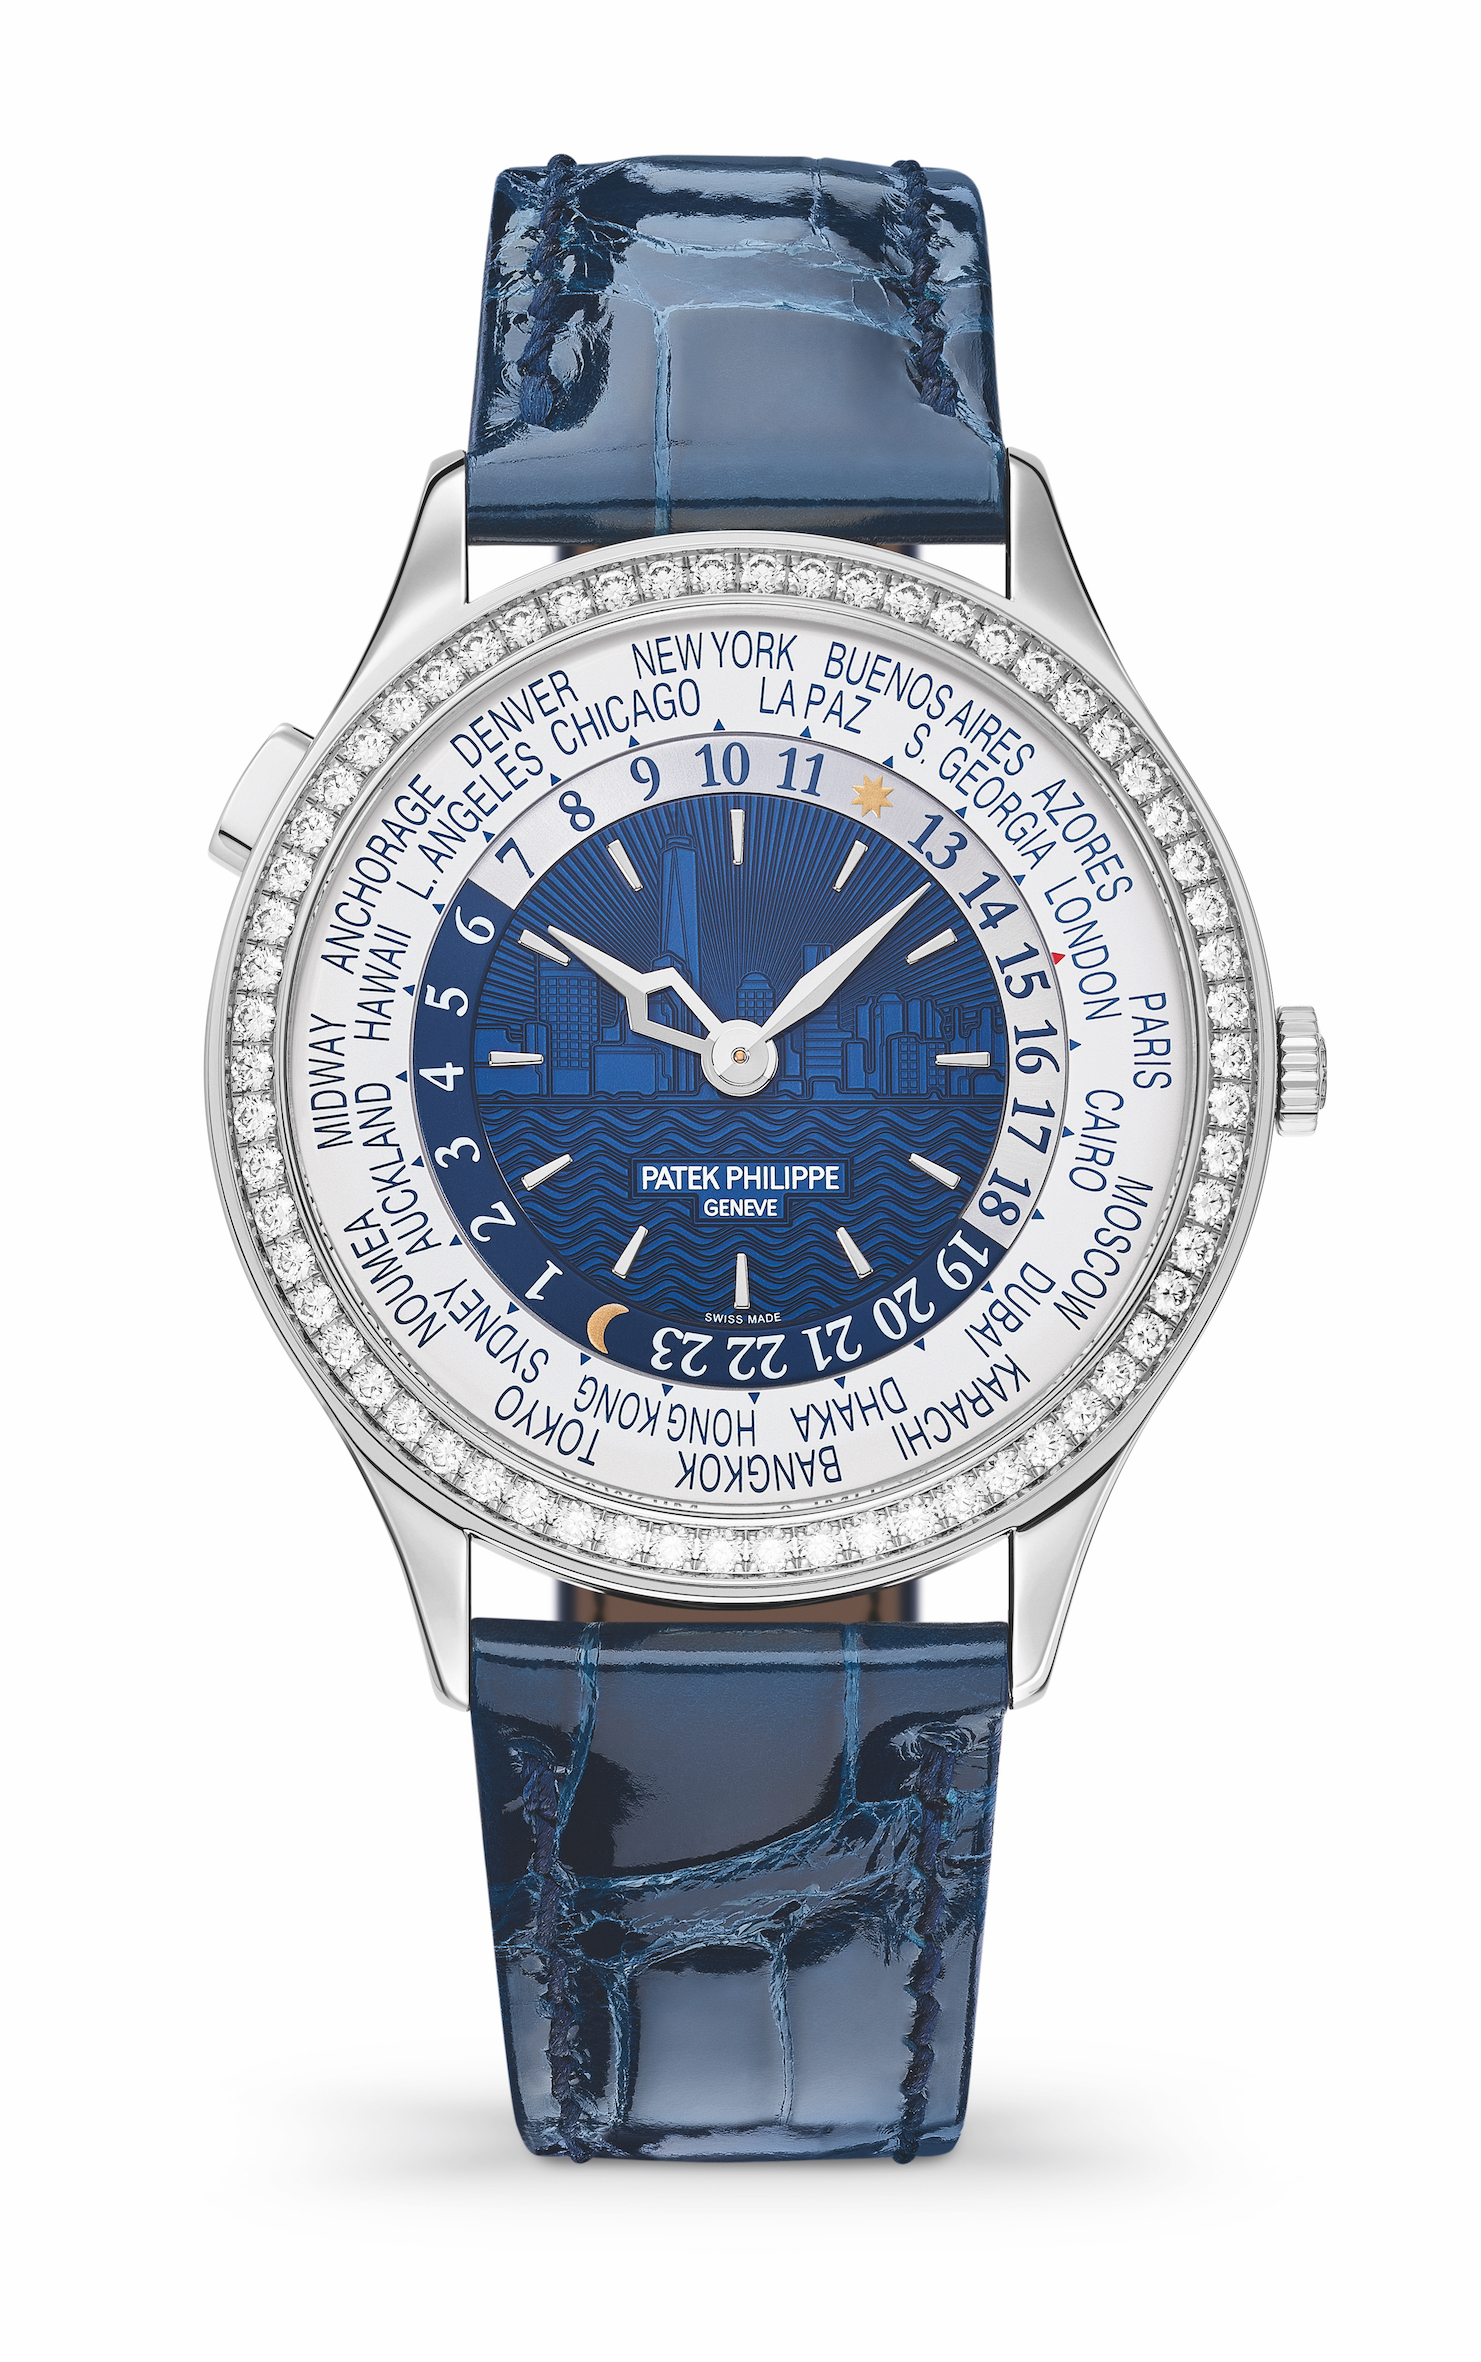 Patek Philippe Ladies’ World Time Ref. 7130 New York 2017 Special Edition